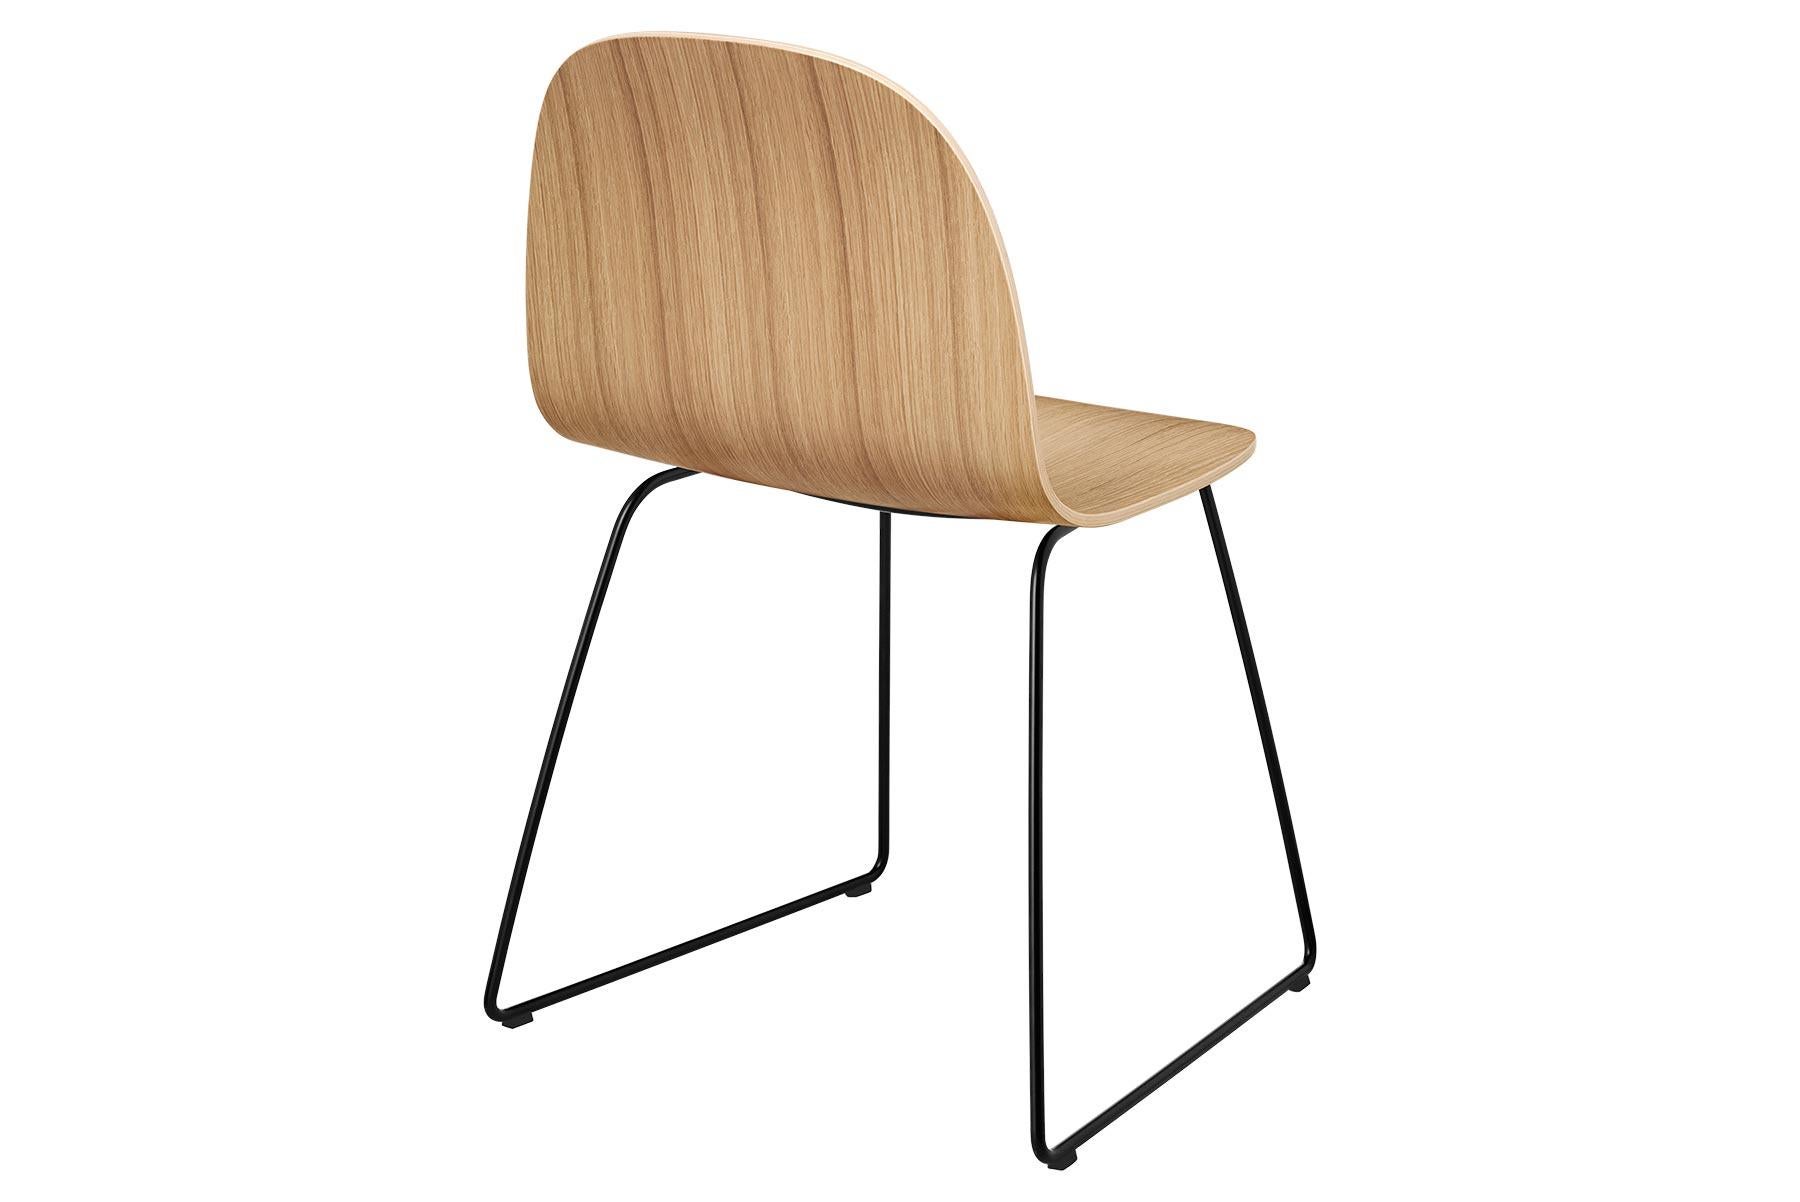 The Gubi 2D chair is a series of light dining chairs made from laminated veneer with options for front upholstery in a wide range of fabrics and leathers, suitable for both private and public spaces. Being an extension to the Classic Gubi 3D chair,